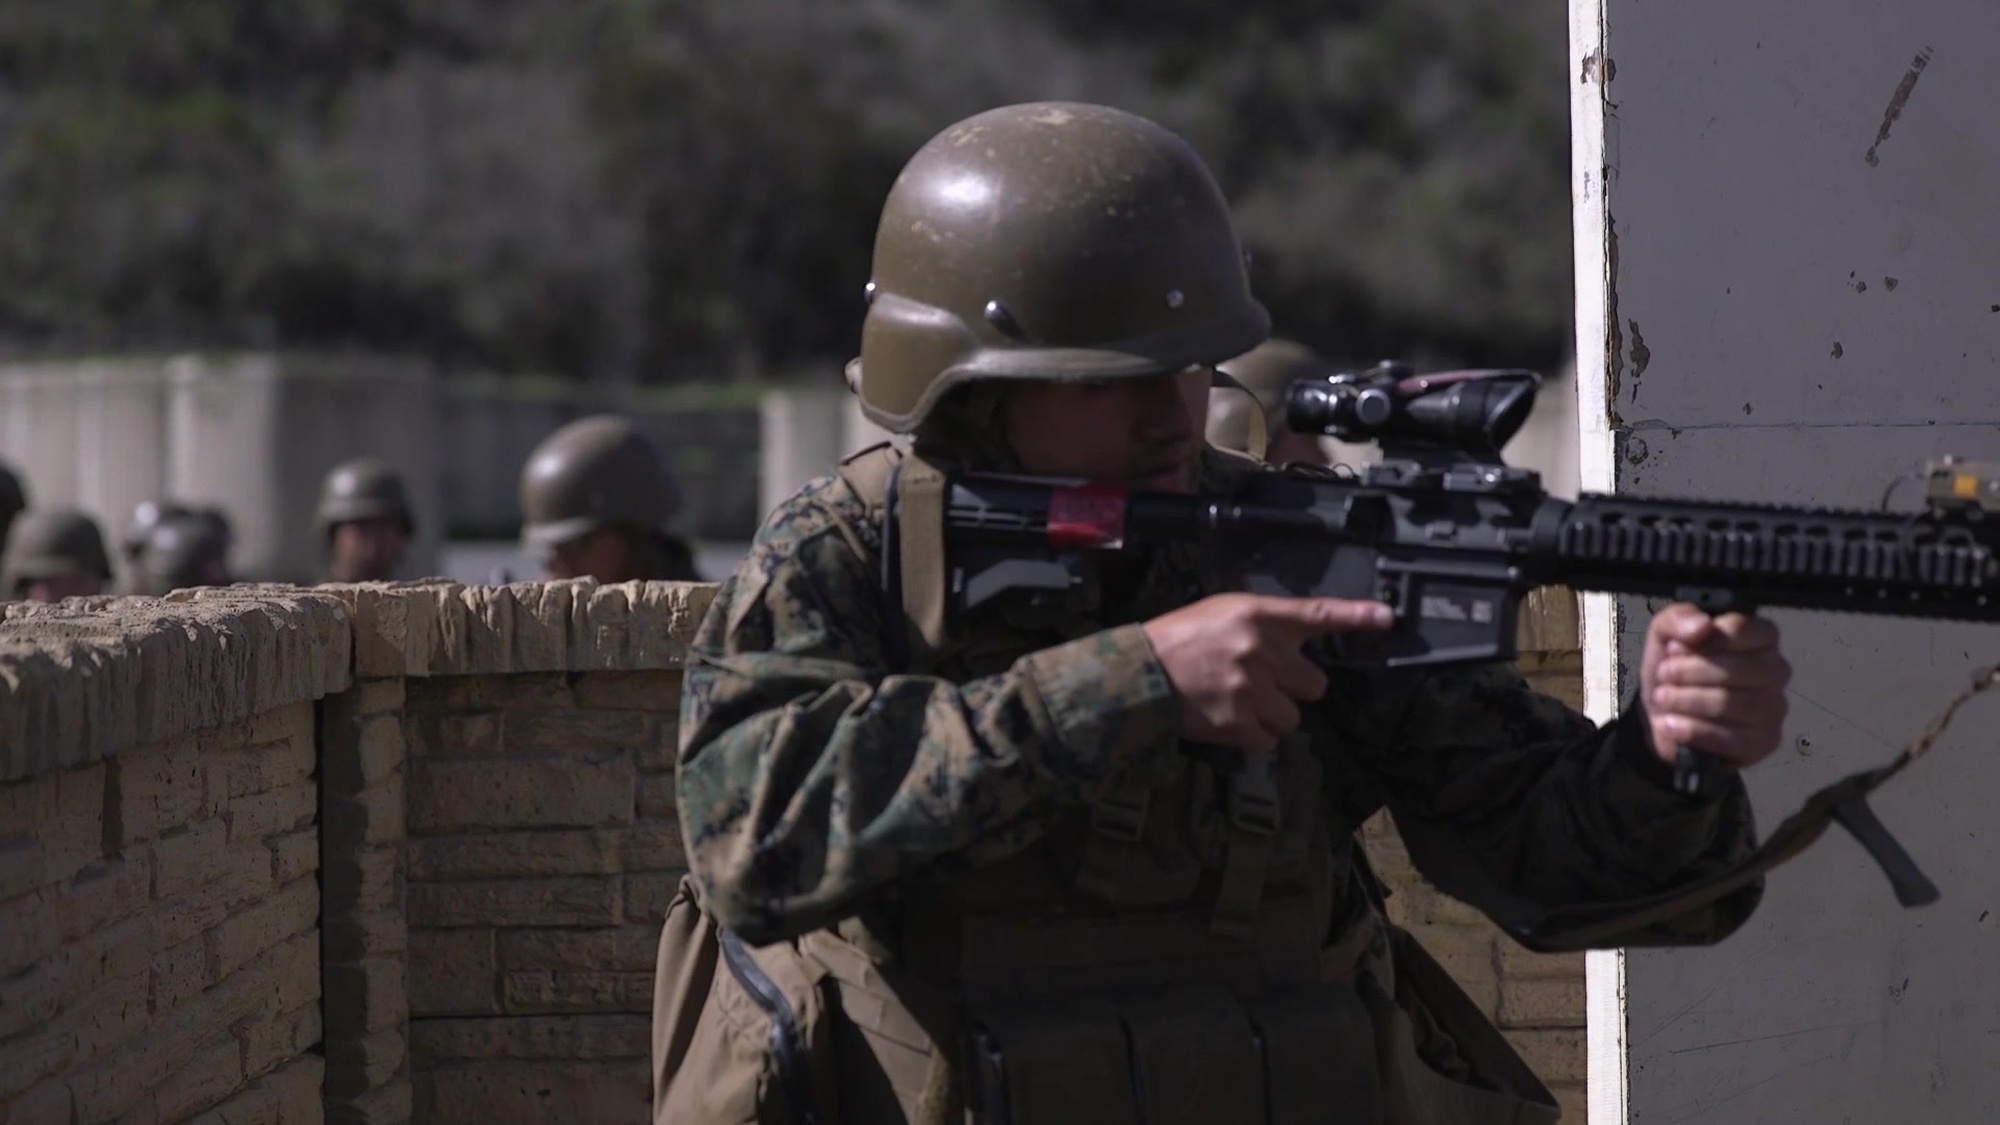 U.S. Marines, with Golf Company, Marine Combat Training Battalion (MCT), School of Infantry – West, execute Military Operations on Urbanized Terrain exercises on Camp Pendleton, Calif., March 23, 2018. Golf Co. is the first integrated male/female MCT company on the West Coast. (U.S. Marine Corps video by Cpl. Dylan Chagnon)